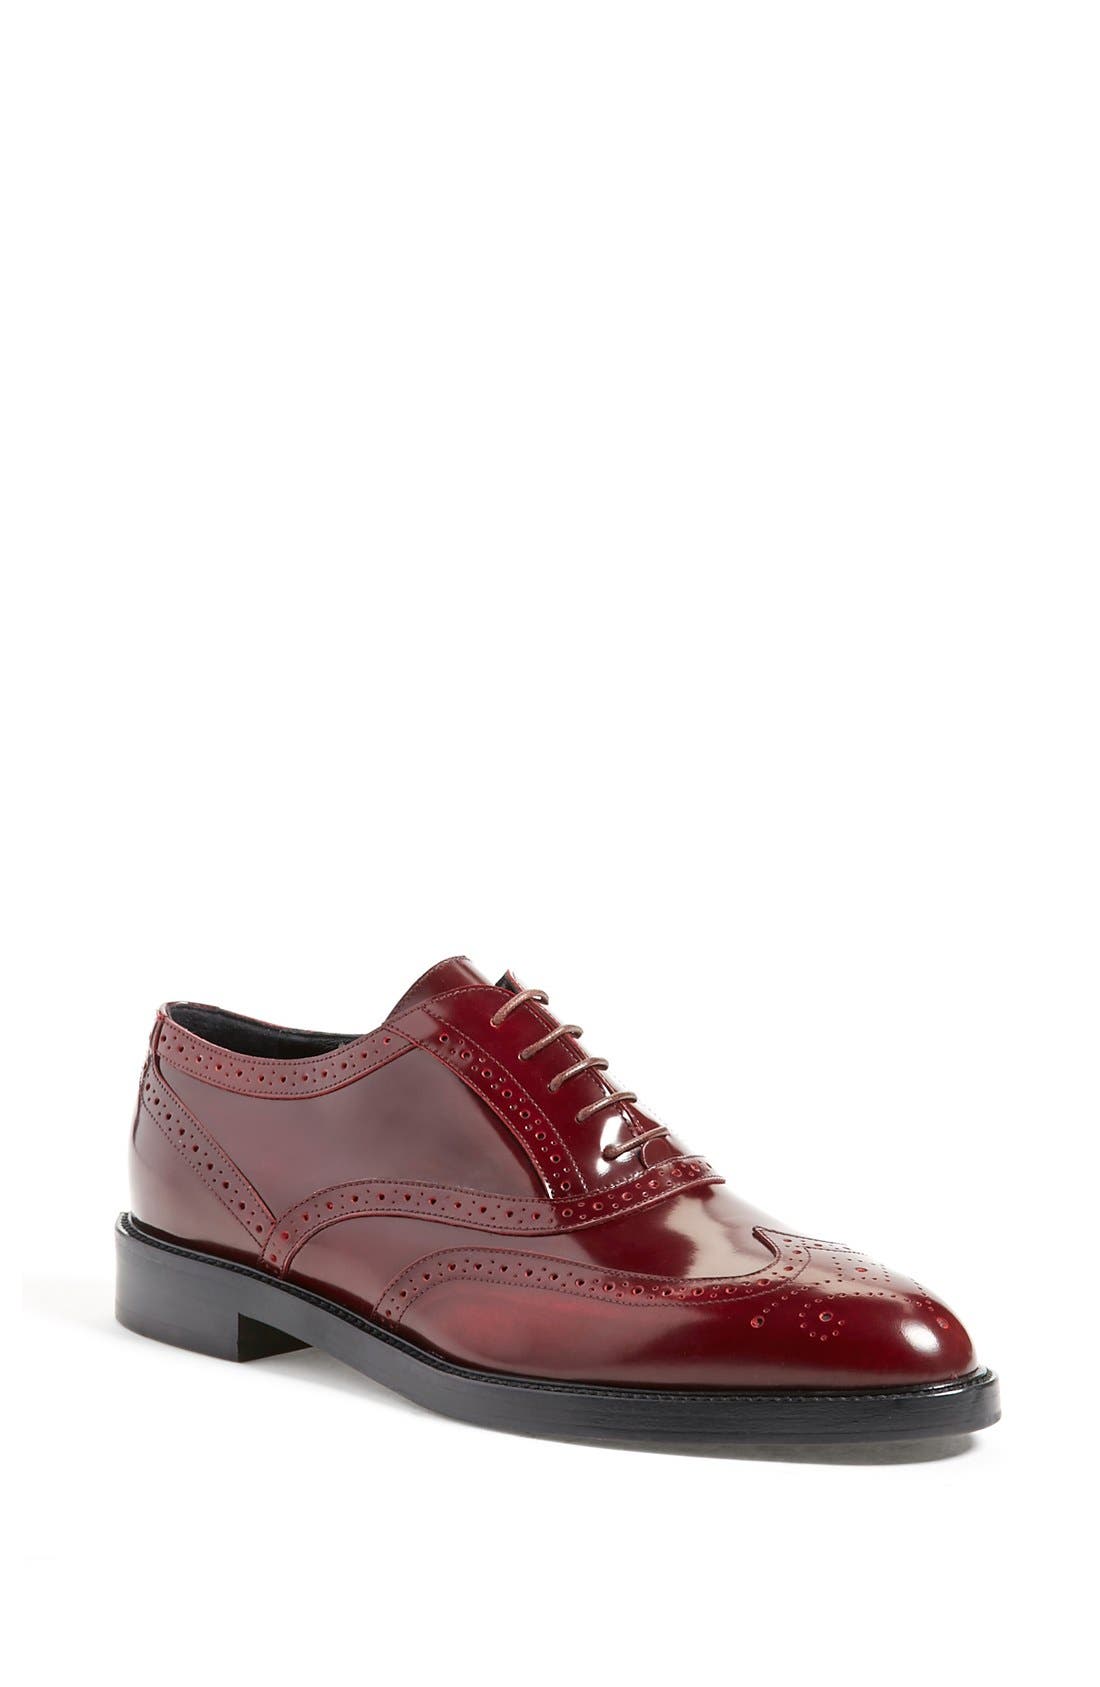 burberry oxford shoes women